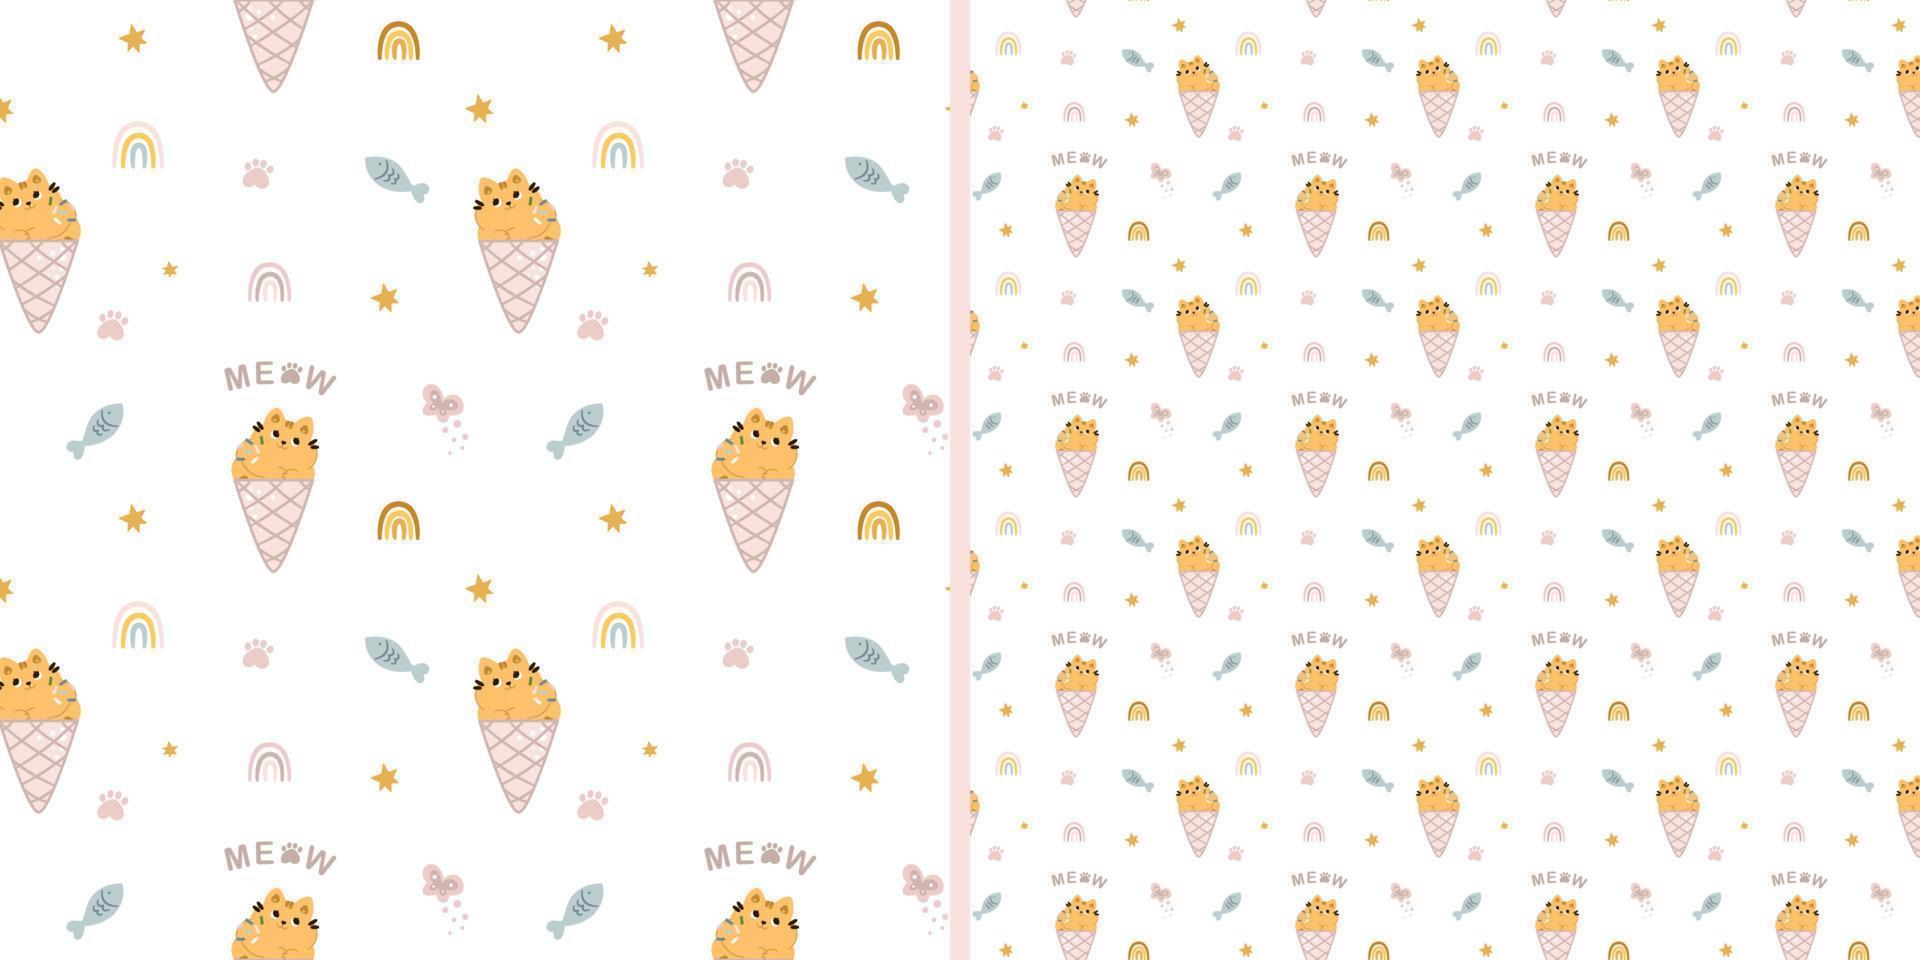 Seamless pattern with cute cats in flowers and ice cream on a white background. Children's texture in scandinavian style for fabric, textile, clothing, nursery decoration. Vector illustration